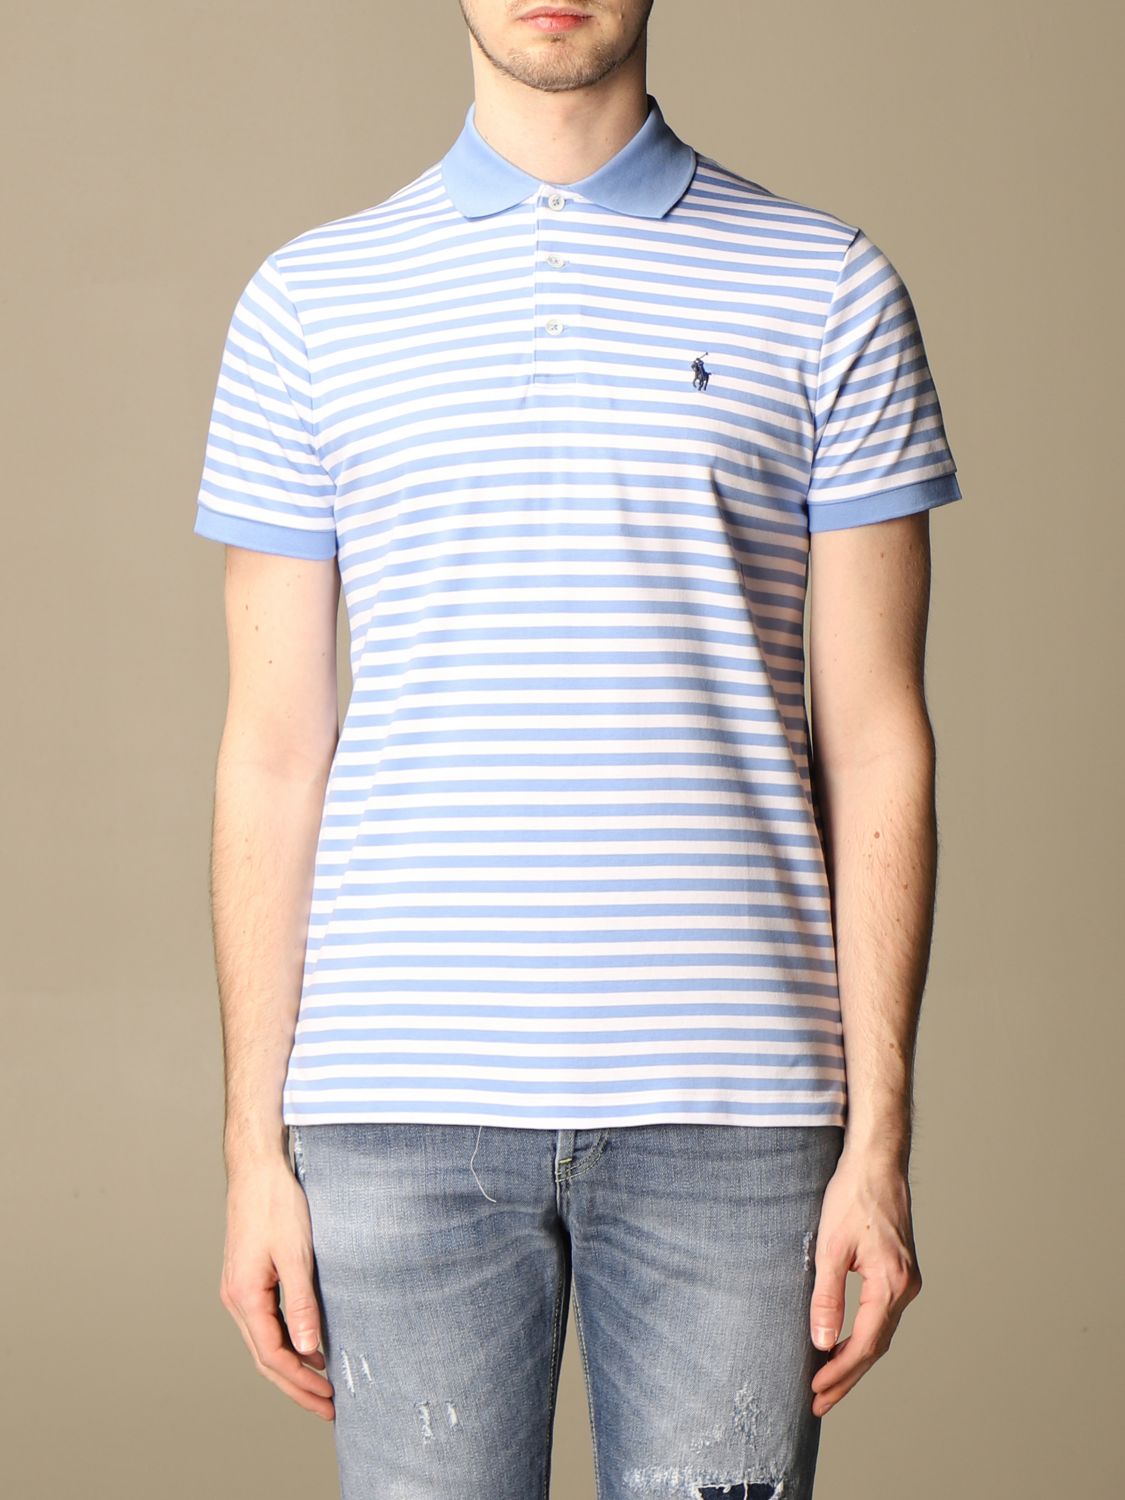 Polo Ralph Lauren - Authenticated Polo Shirt - Cotton Blue Striped for Men, Very Good Condition